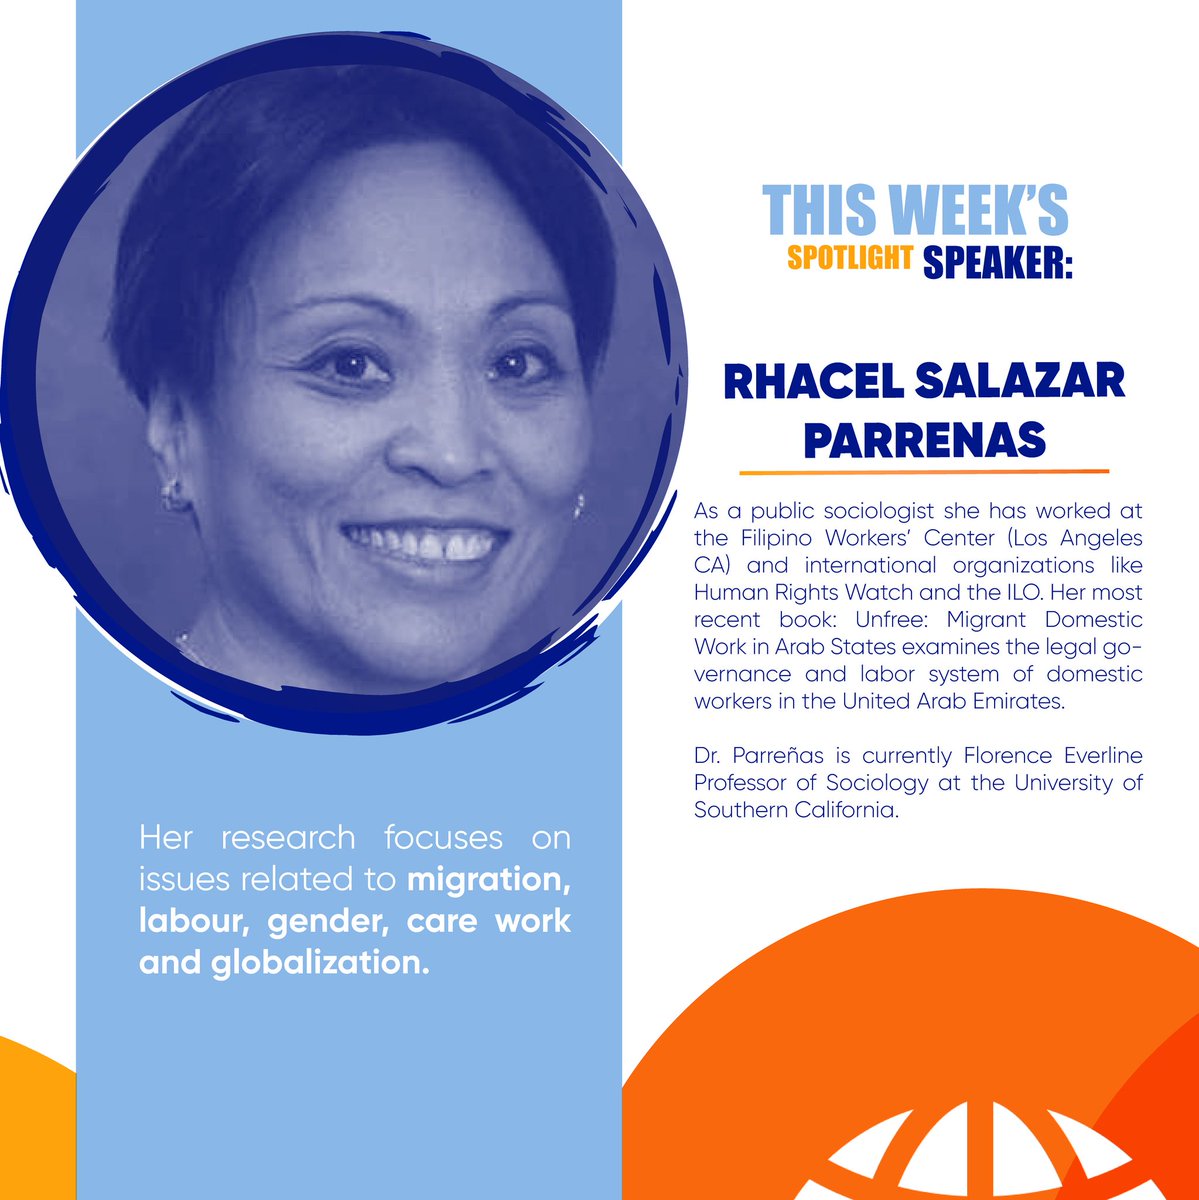 @CareworkN is excited to announce the 3rd Global #Carework Summit Keynote Speaker: @USCSociology professor @rhacel Parreñas, author of Unfree: Migrant Domestic Work in Arab States(@stanfordpress). Join us in #CostaRica2023 from June 7-9. #EarlyRegistration deadline is March 15th!